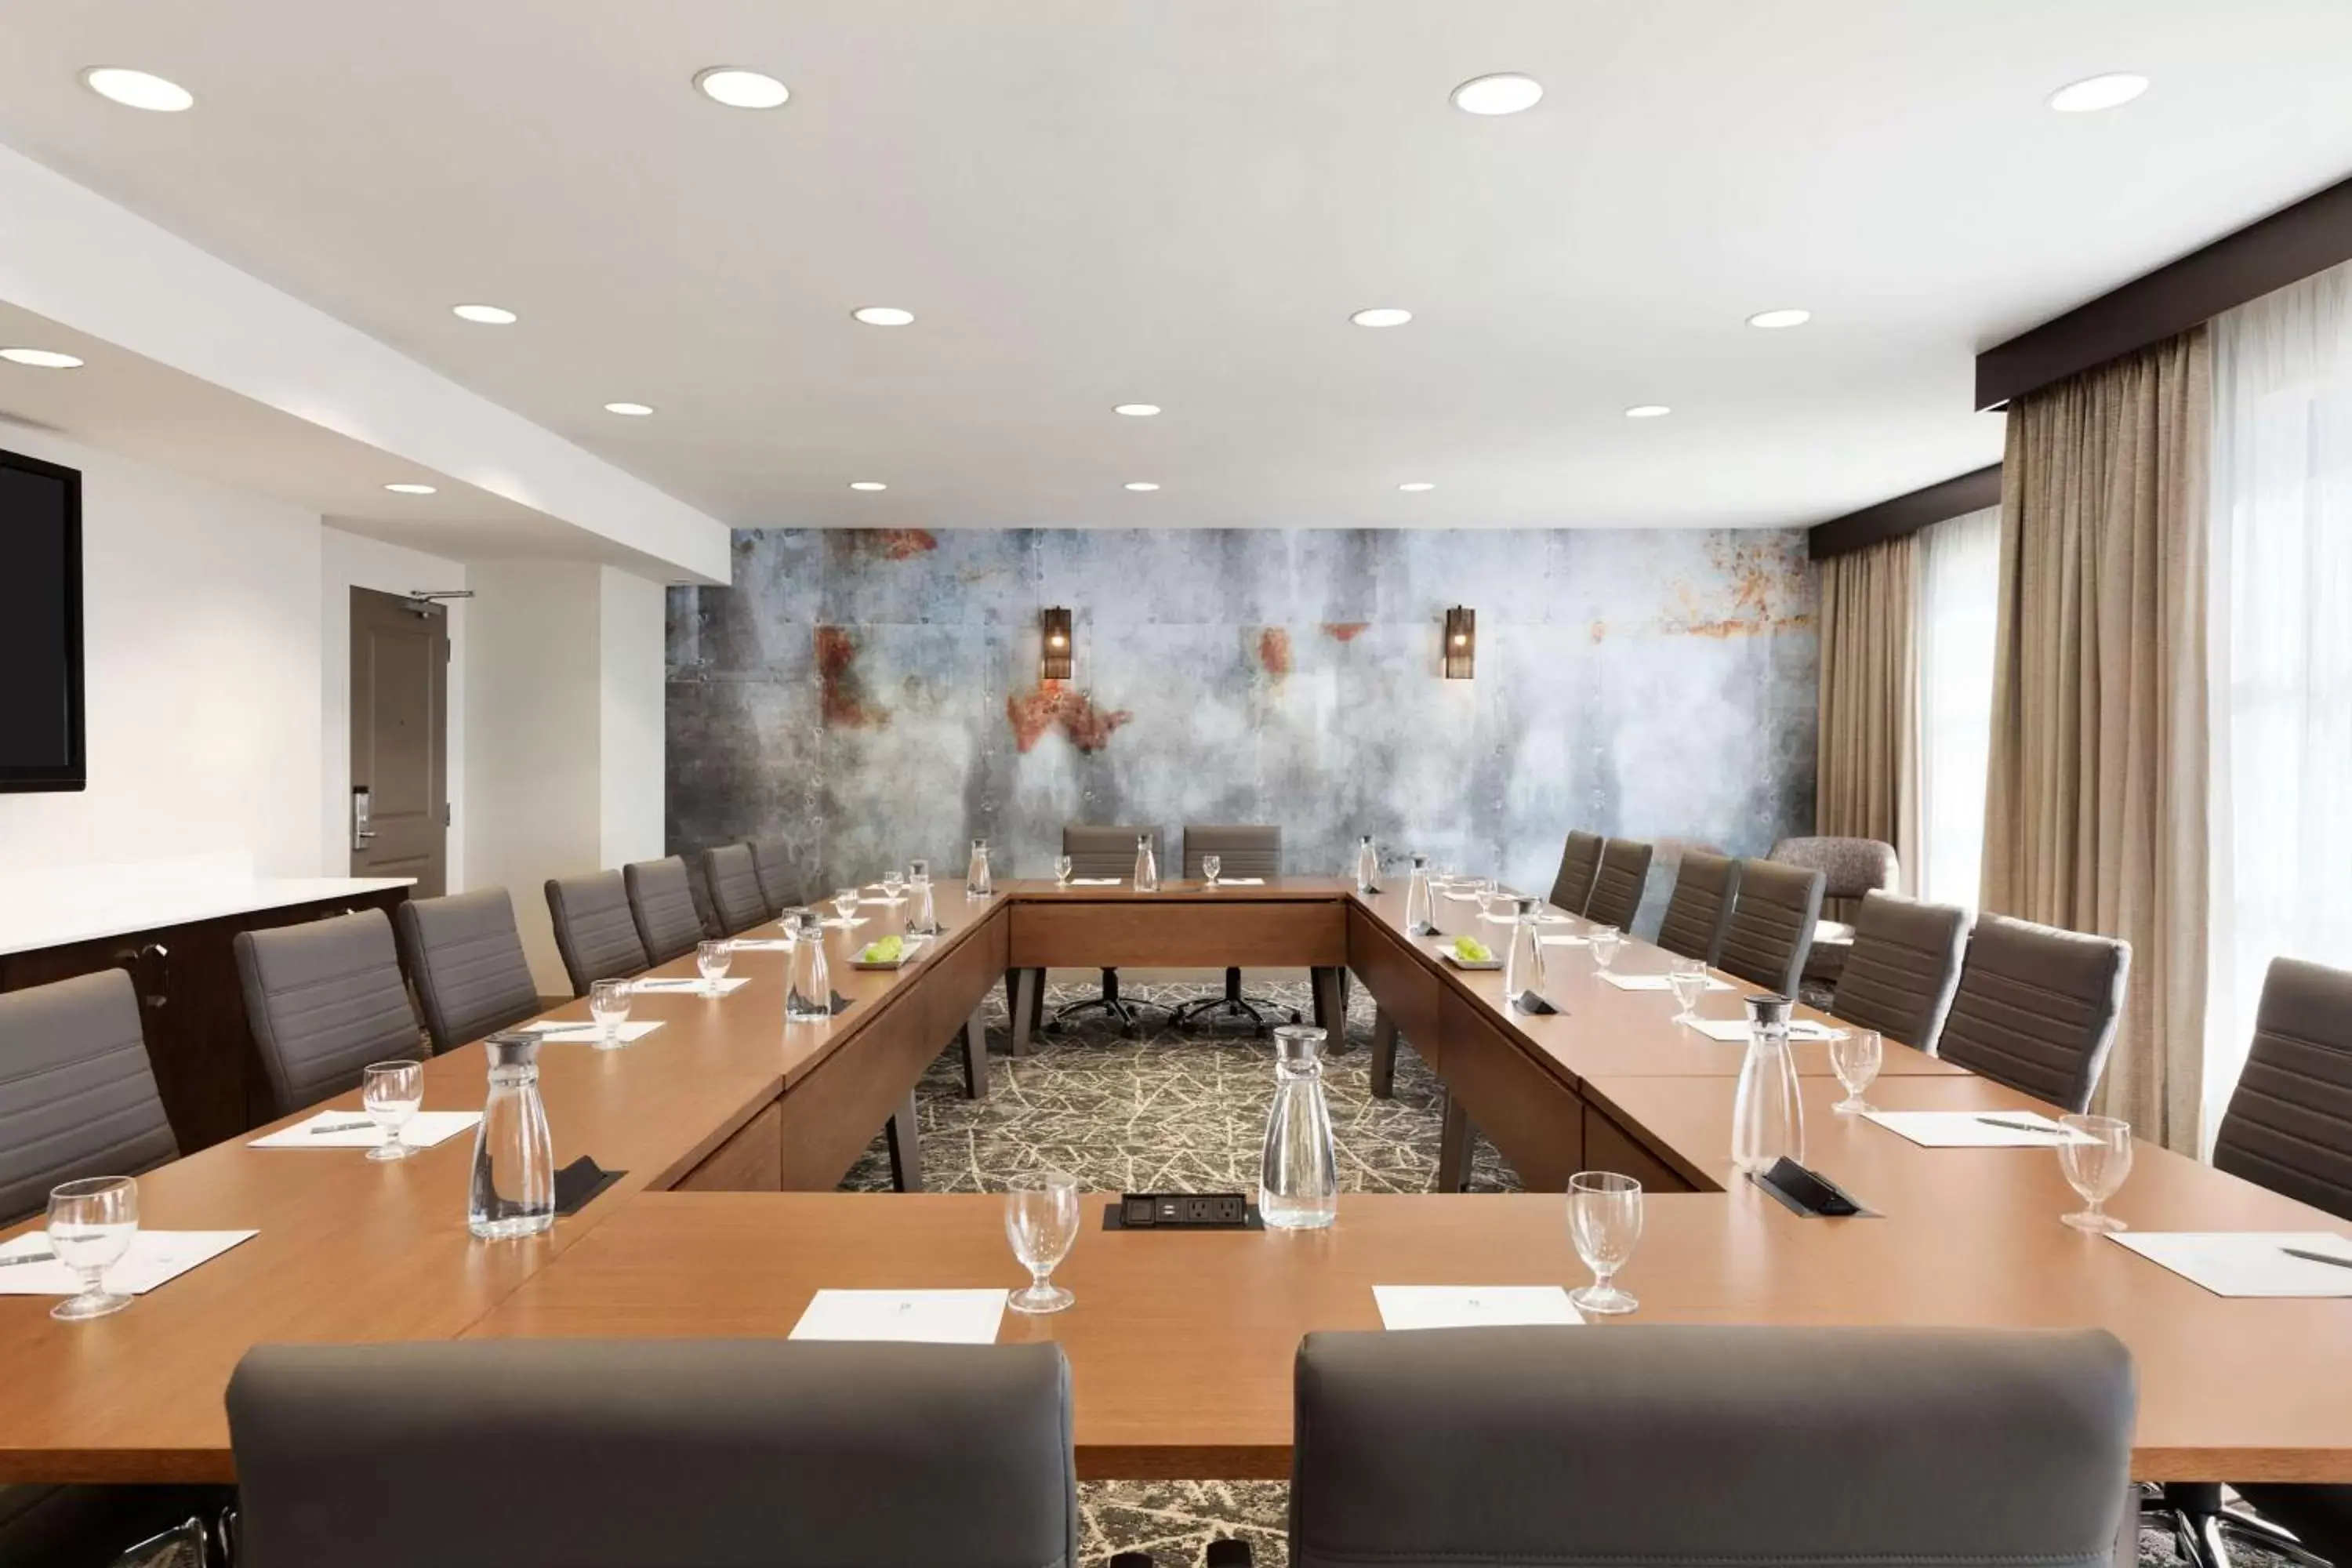 Meeting/conference room in Embassy Suites San Antonio Brooks City Base Hotel & Spa